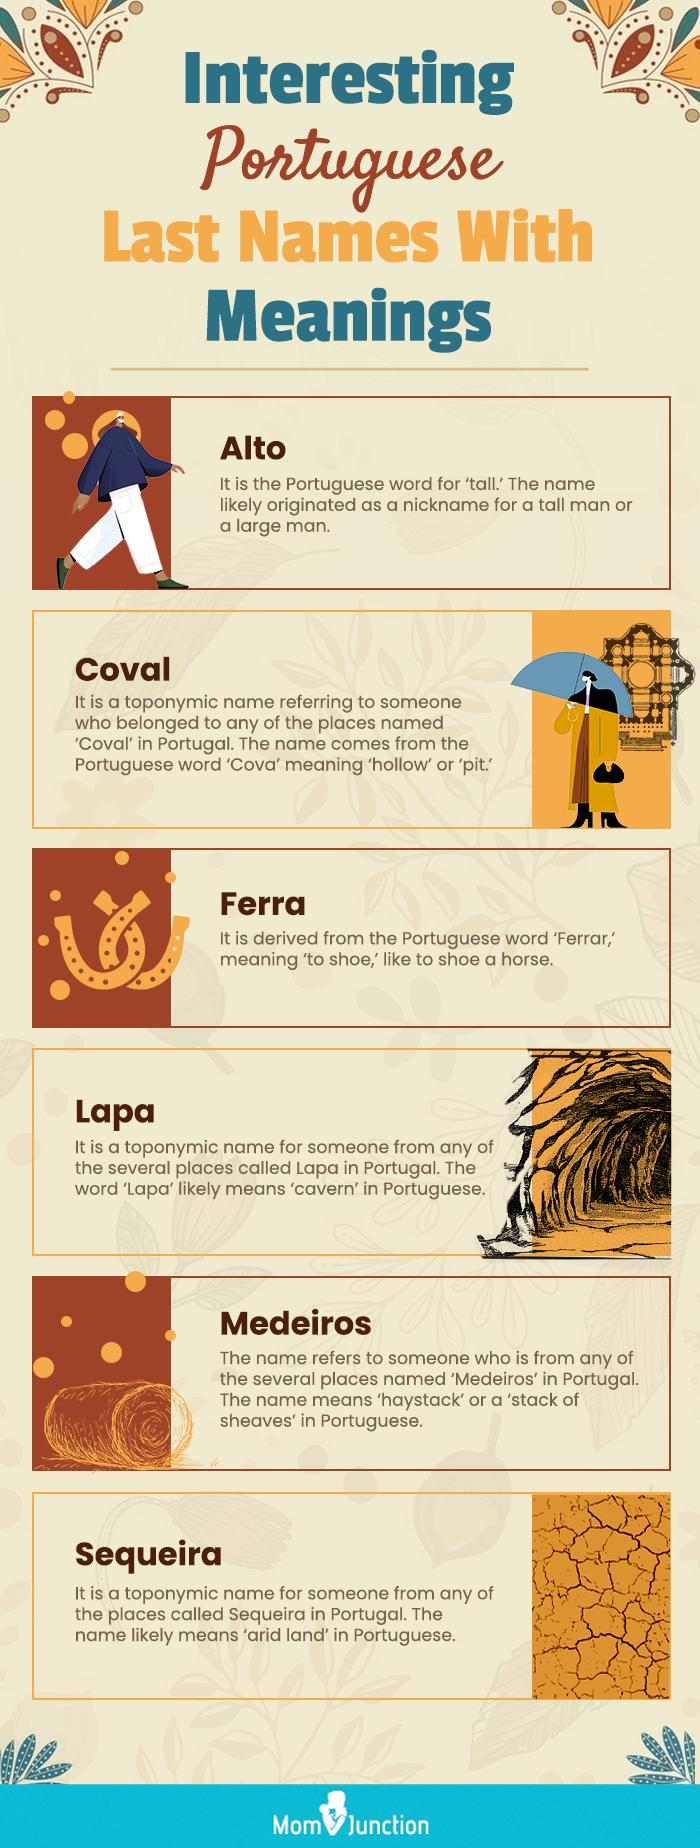 intresting portugese last names with meanings (infographic)